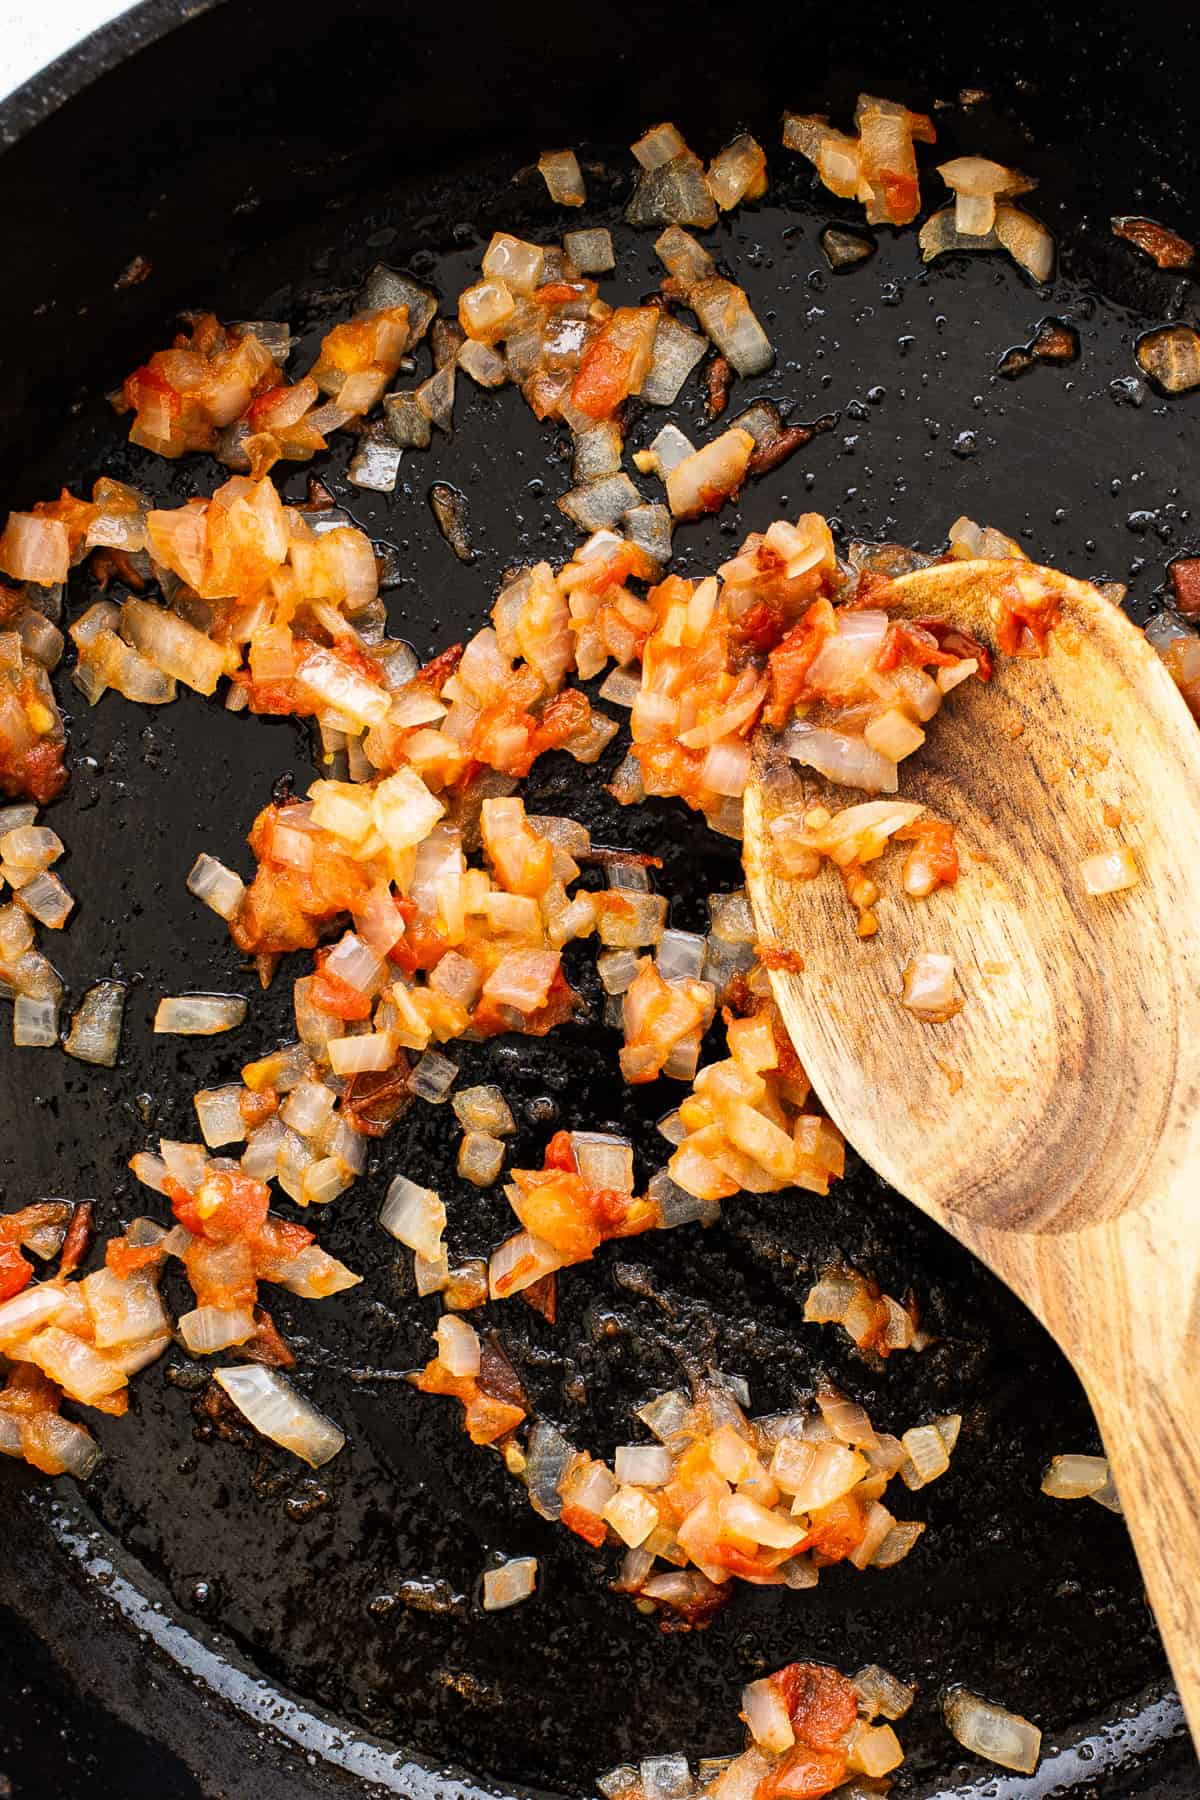 Sauteed onions, tomatoes, and garlic in a skillet.